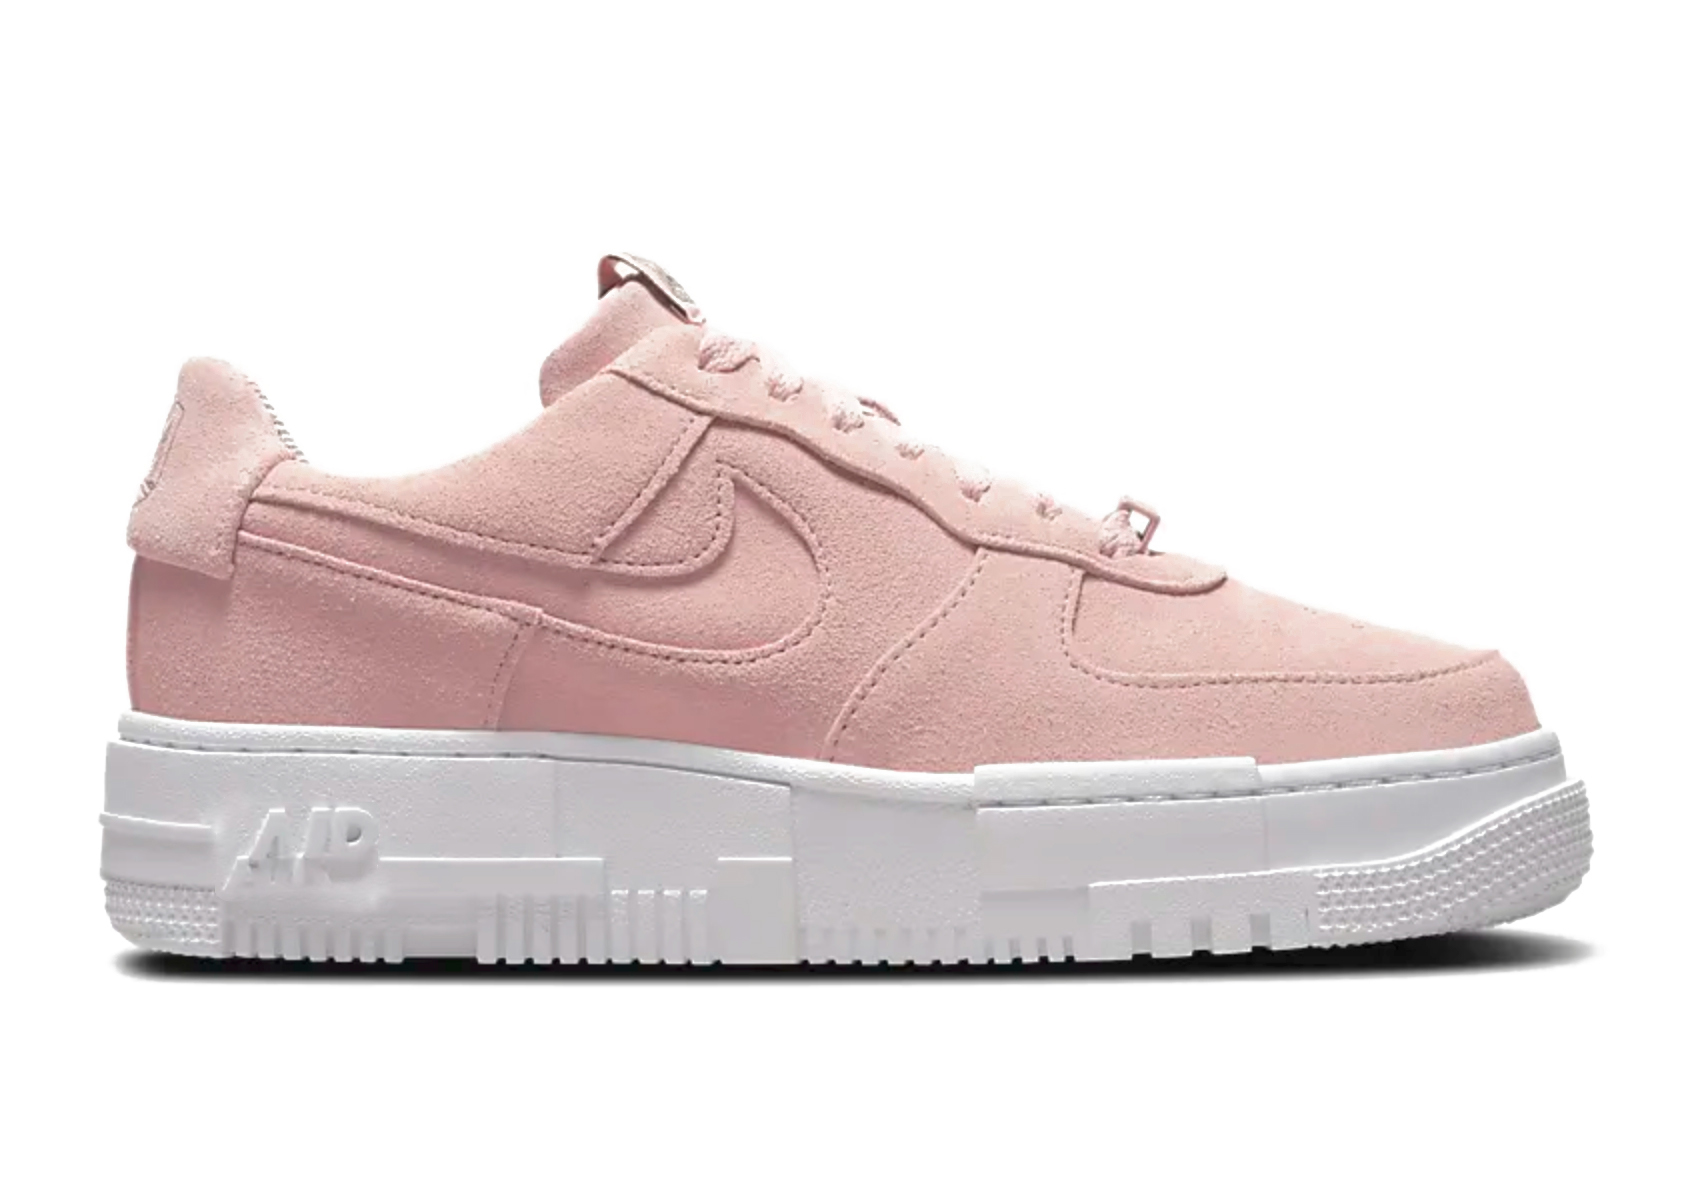 Nike Air Force 1 Low Pixel Pink Oxford (Women's) - DQ5570-600 - US